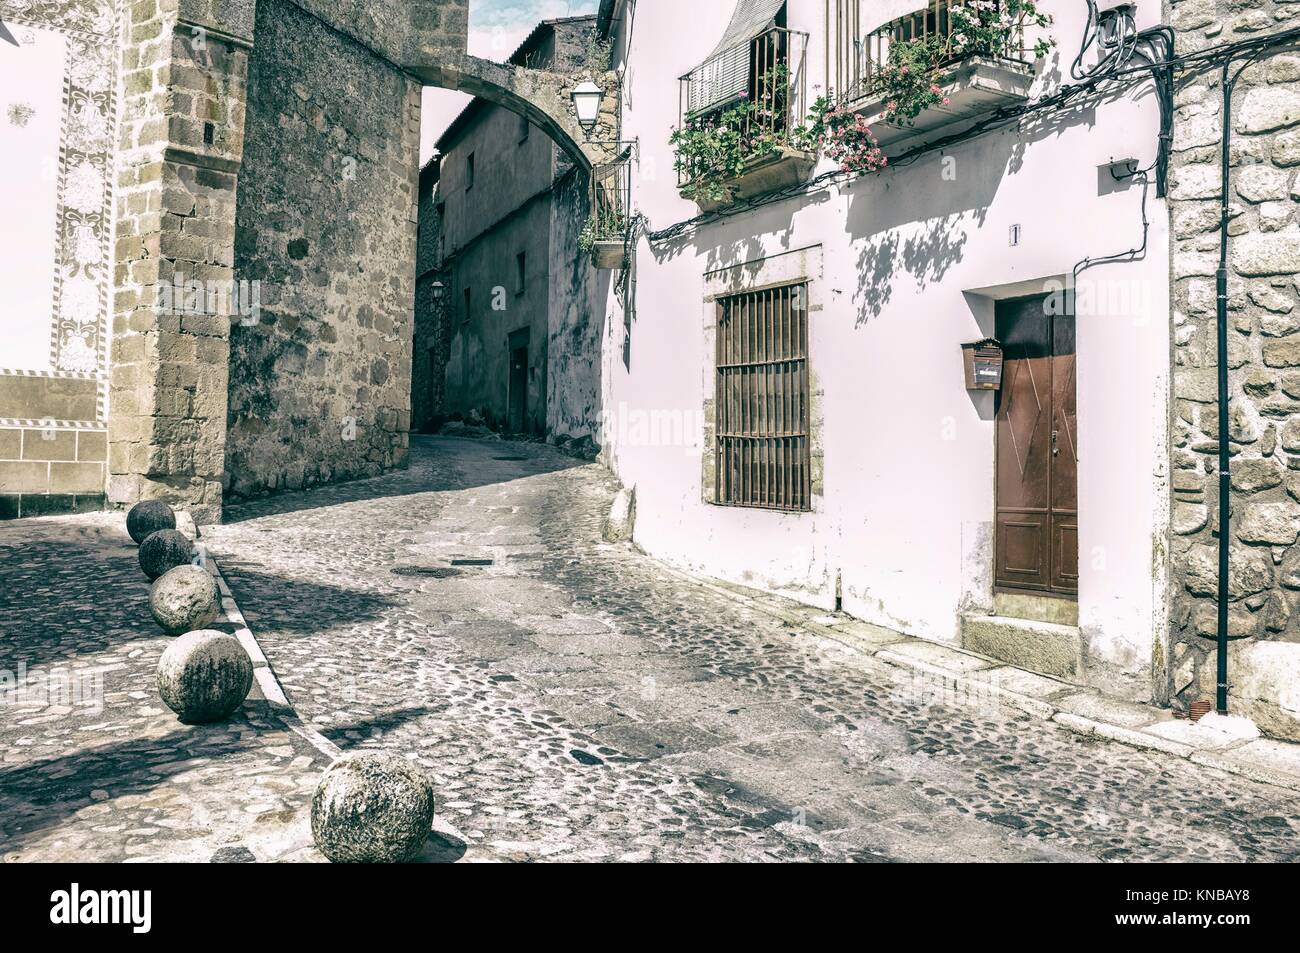 Stone and whitewashed houses of Trujillo street, Extremadura, Spain. Vintage filtered. Stock Photo